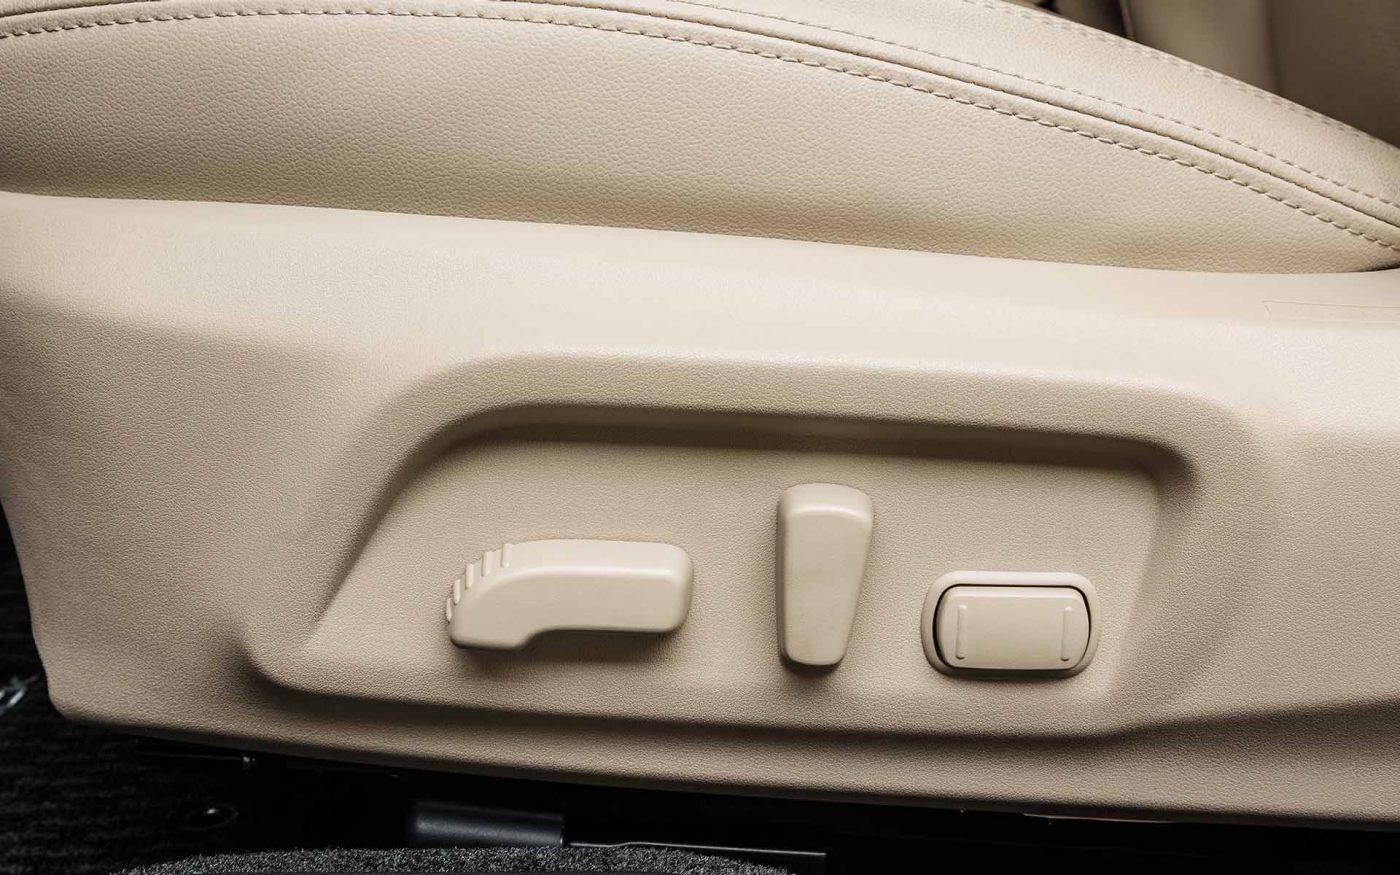 2018 Subaru Outback Power Seats with Memory